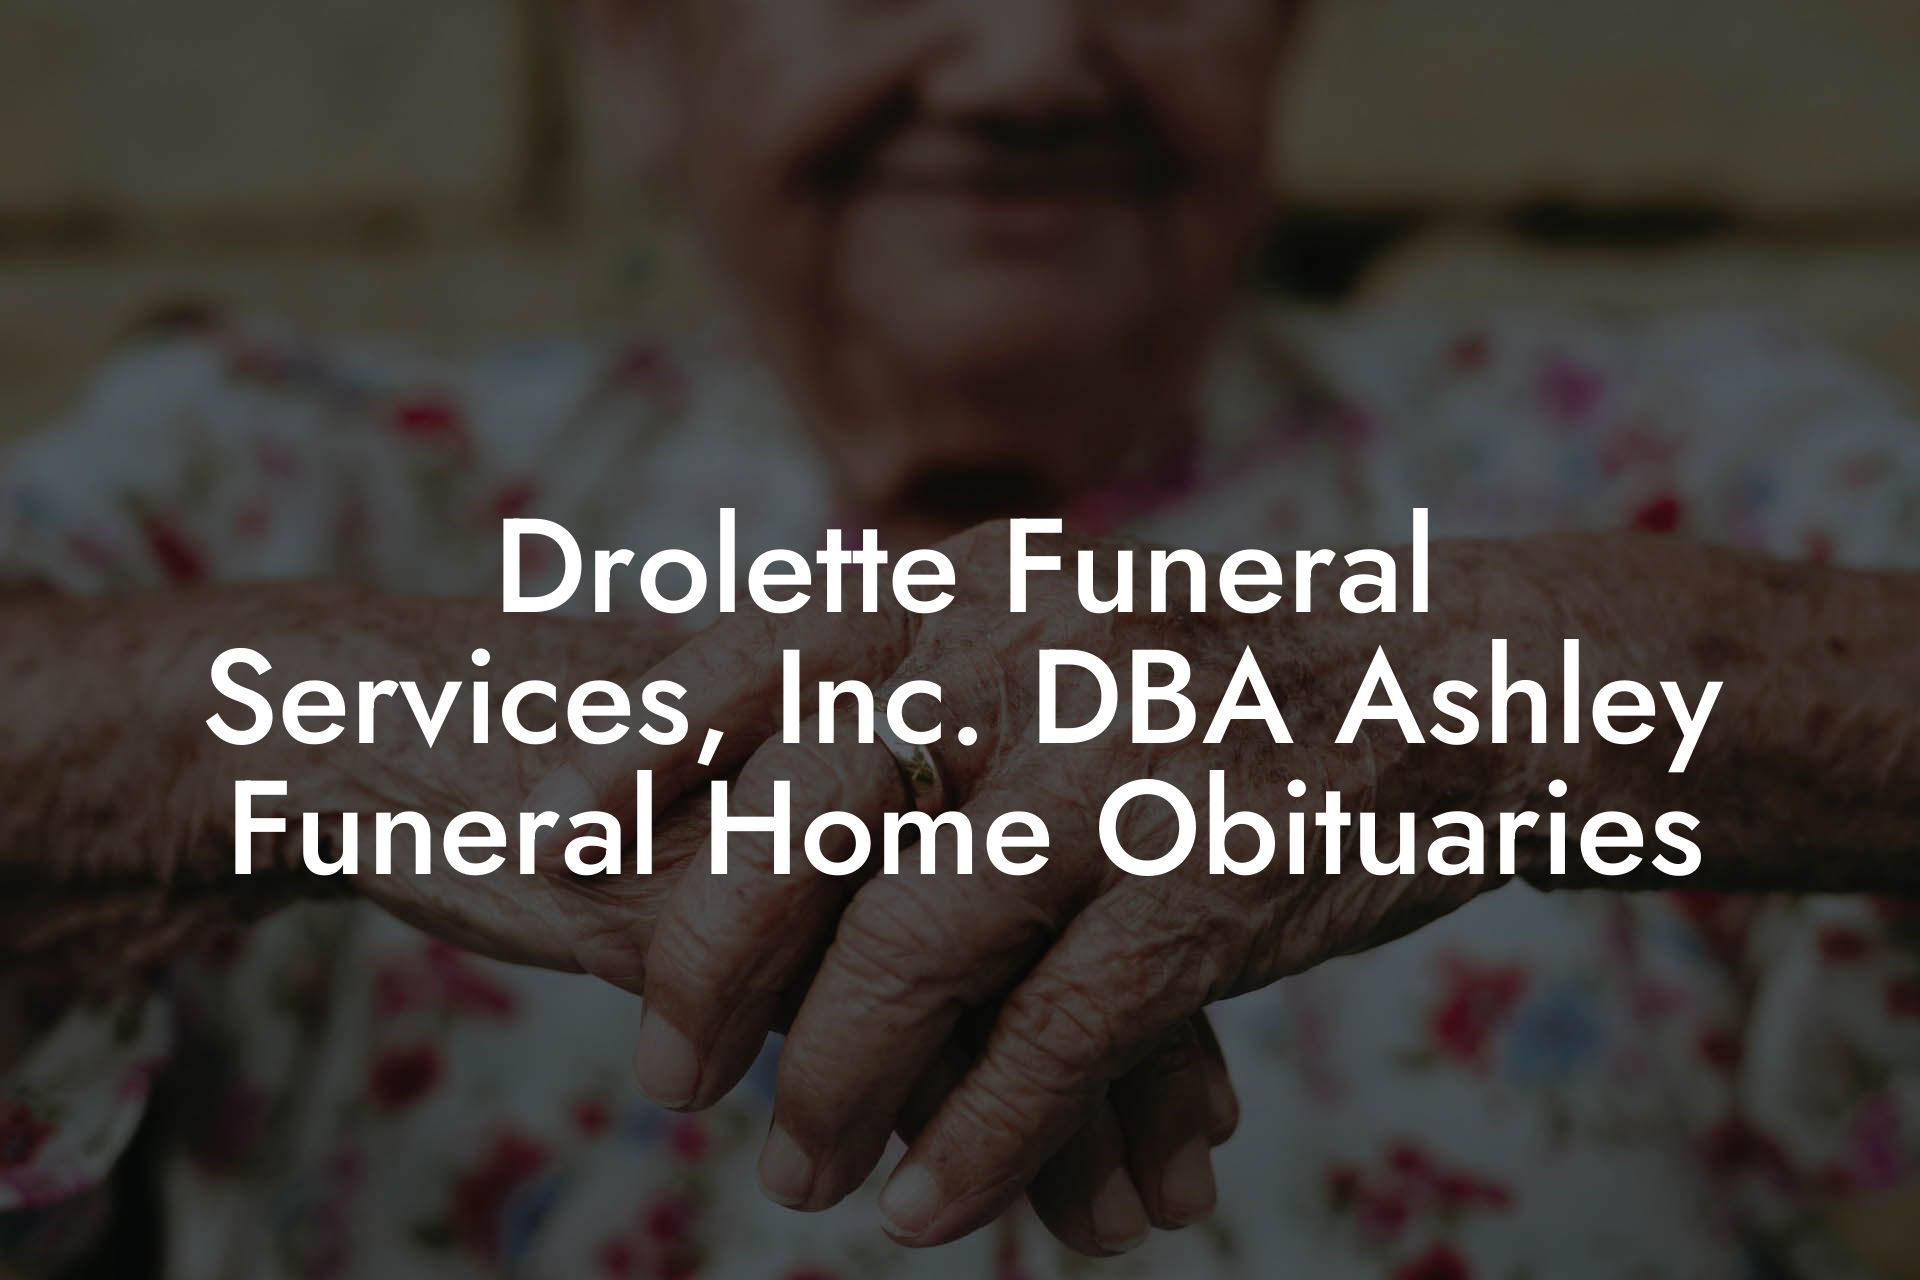 Drolette Funeral Services, Inc. DBA  Ashley Funeral Home Obituaries